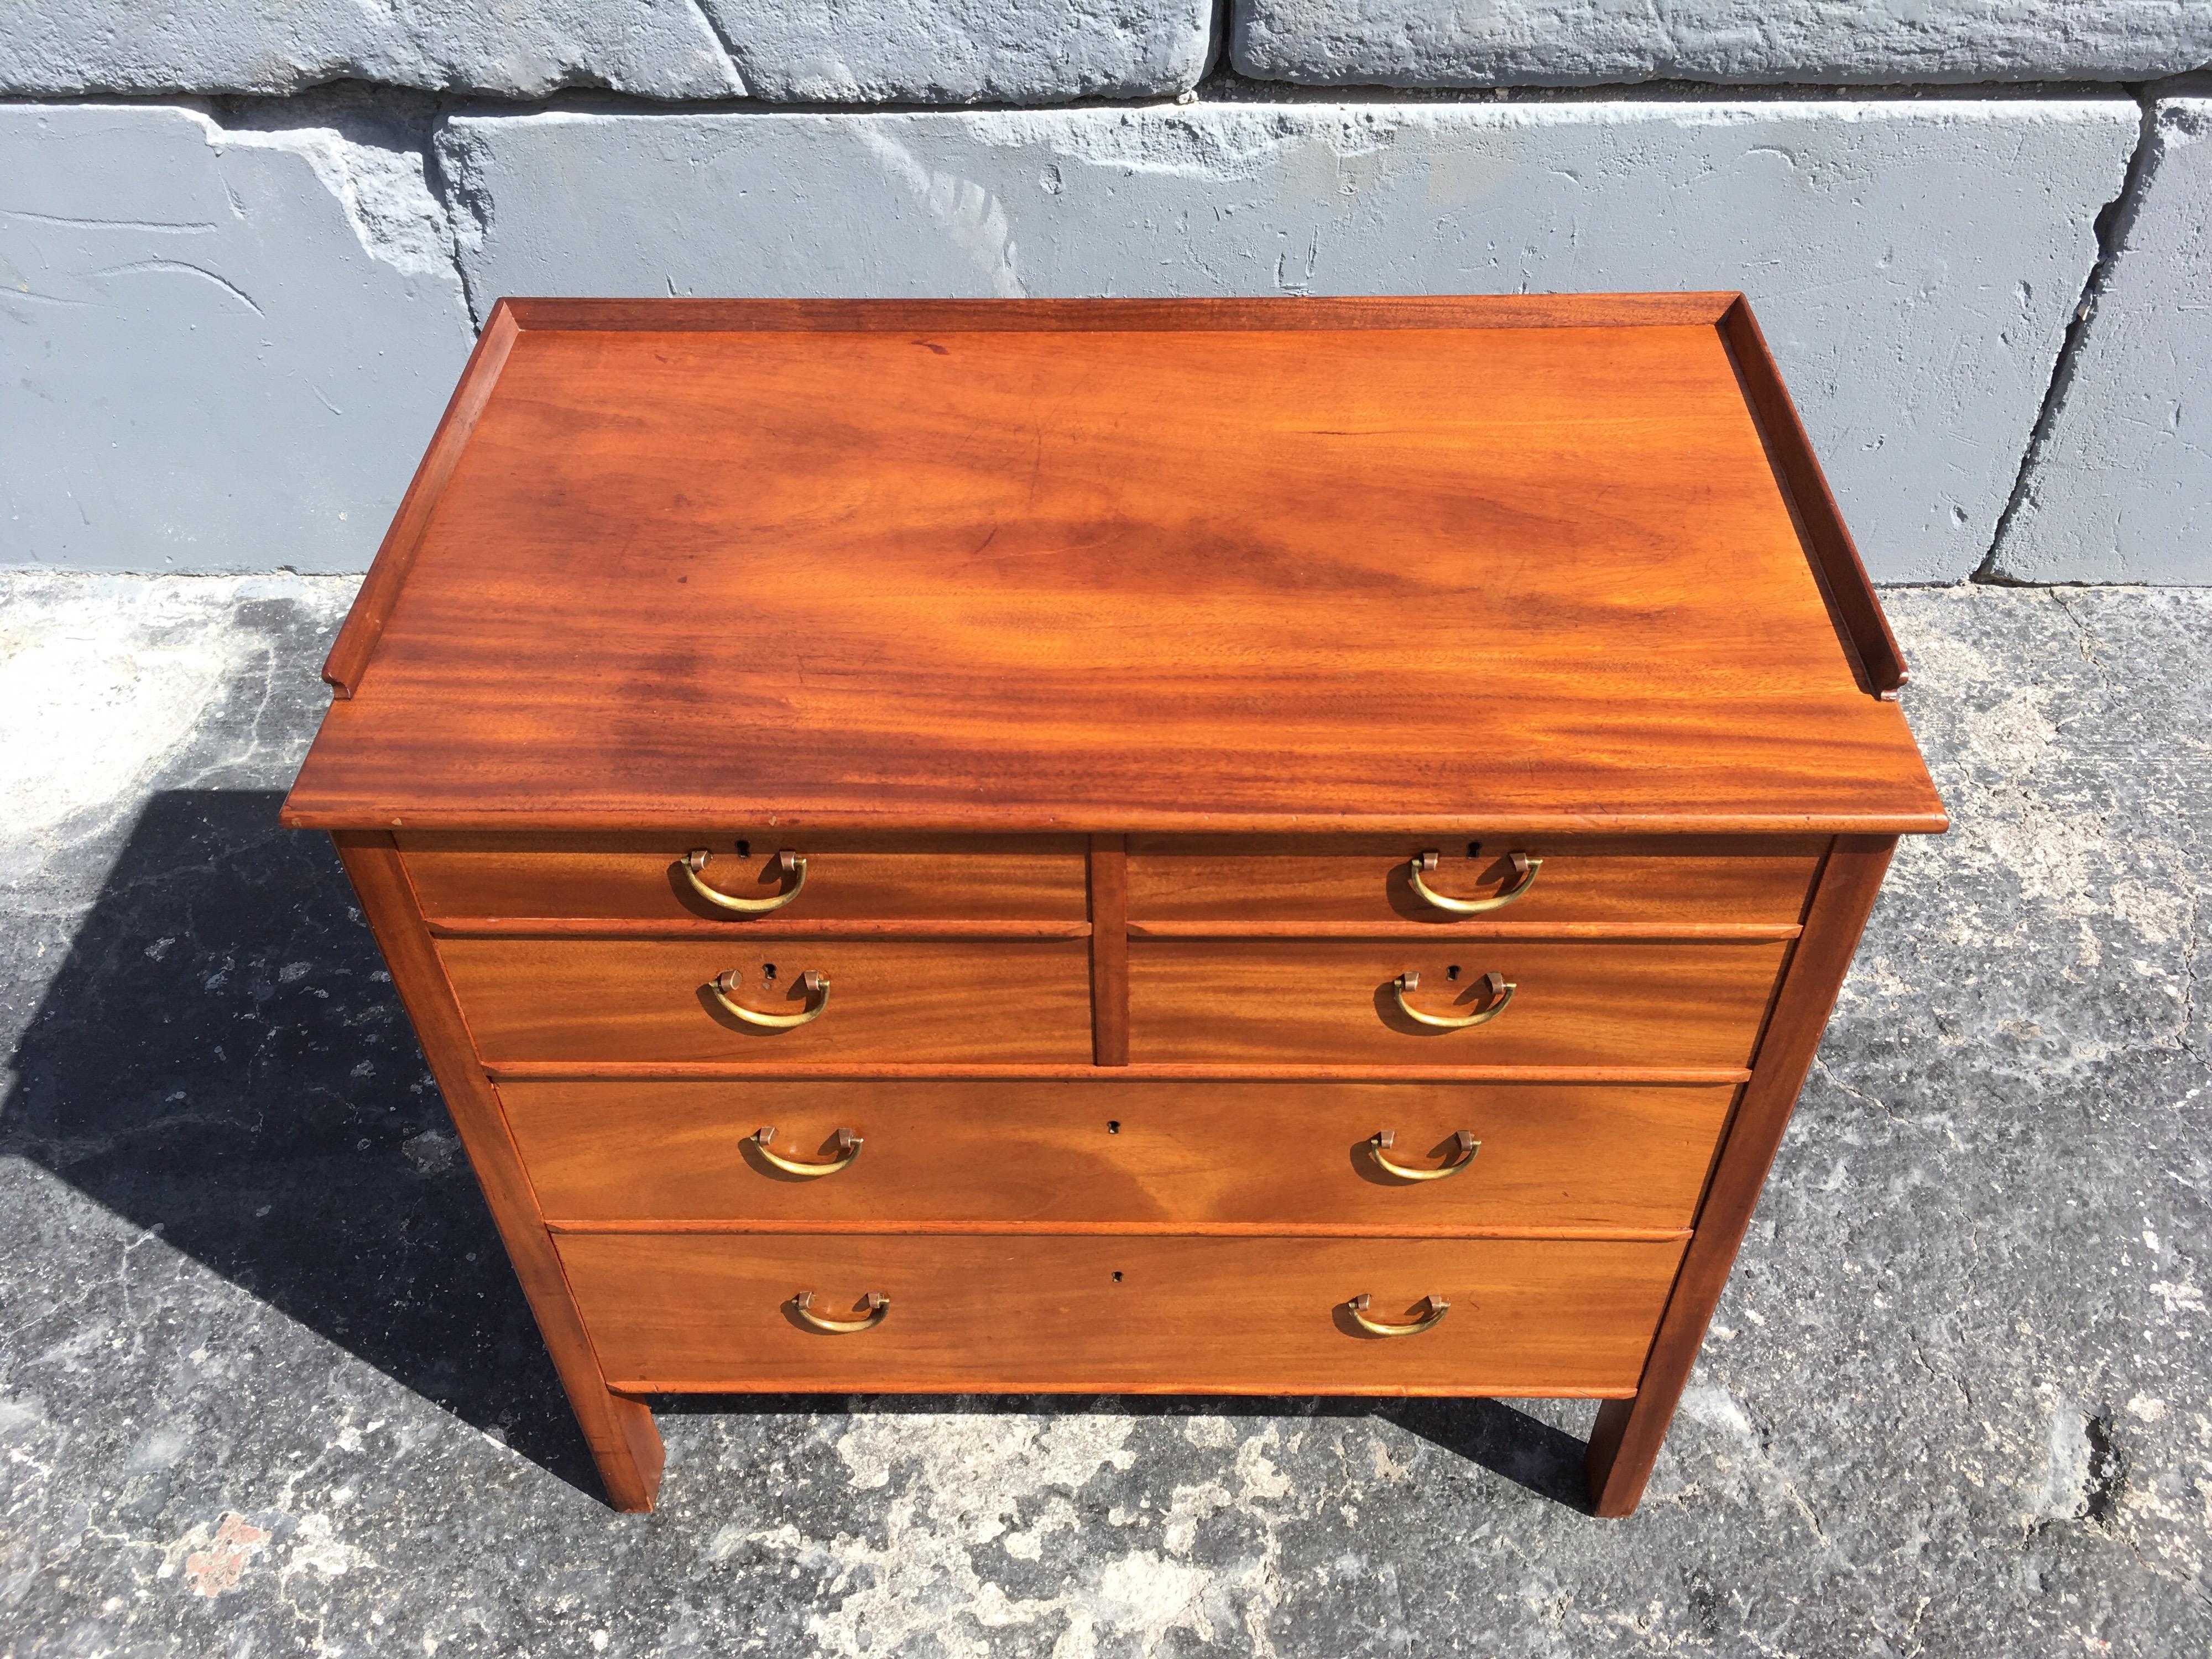 Exceptional Josef Frank Chest of Drawers, Cabinet, Svenskt Tenn, Mahogany, Brass In Good Condition For Sale In Miami, FL